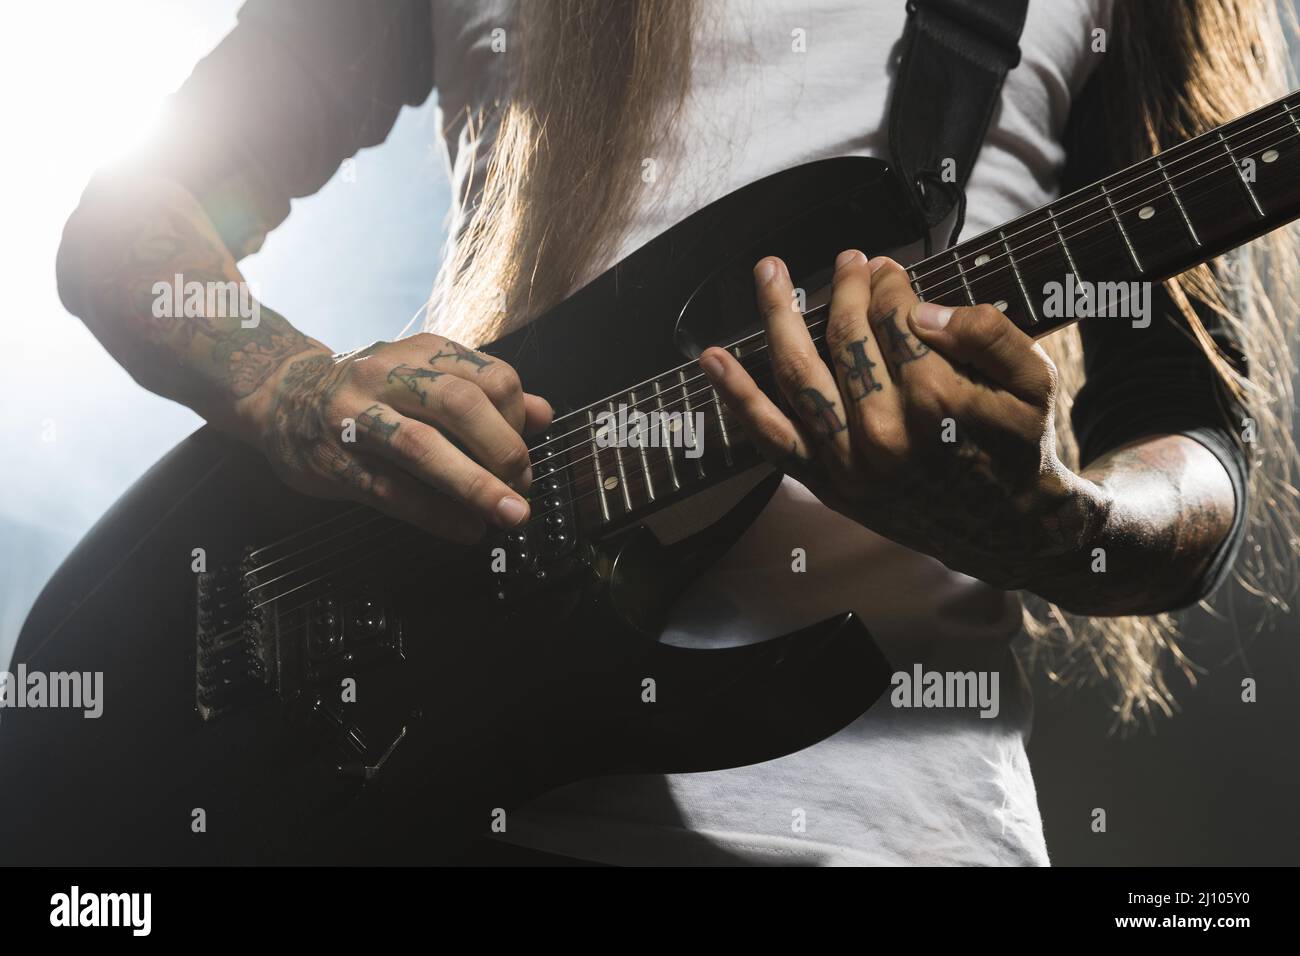 Artist playing electric guitar Stock Photo